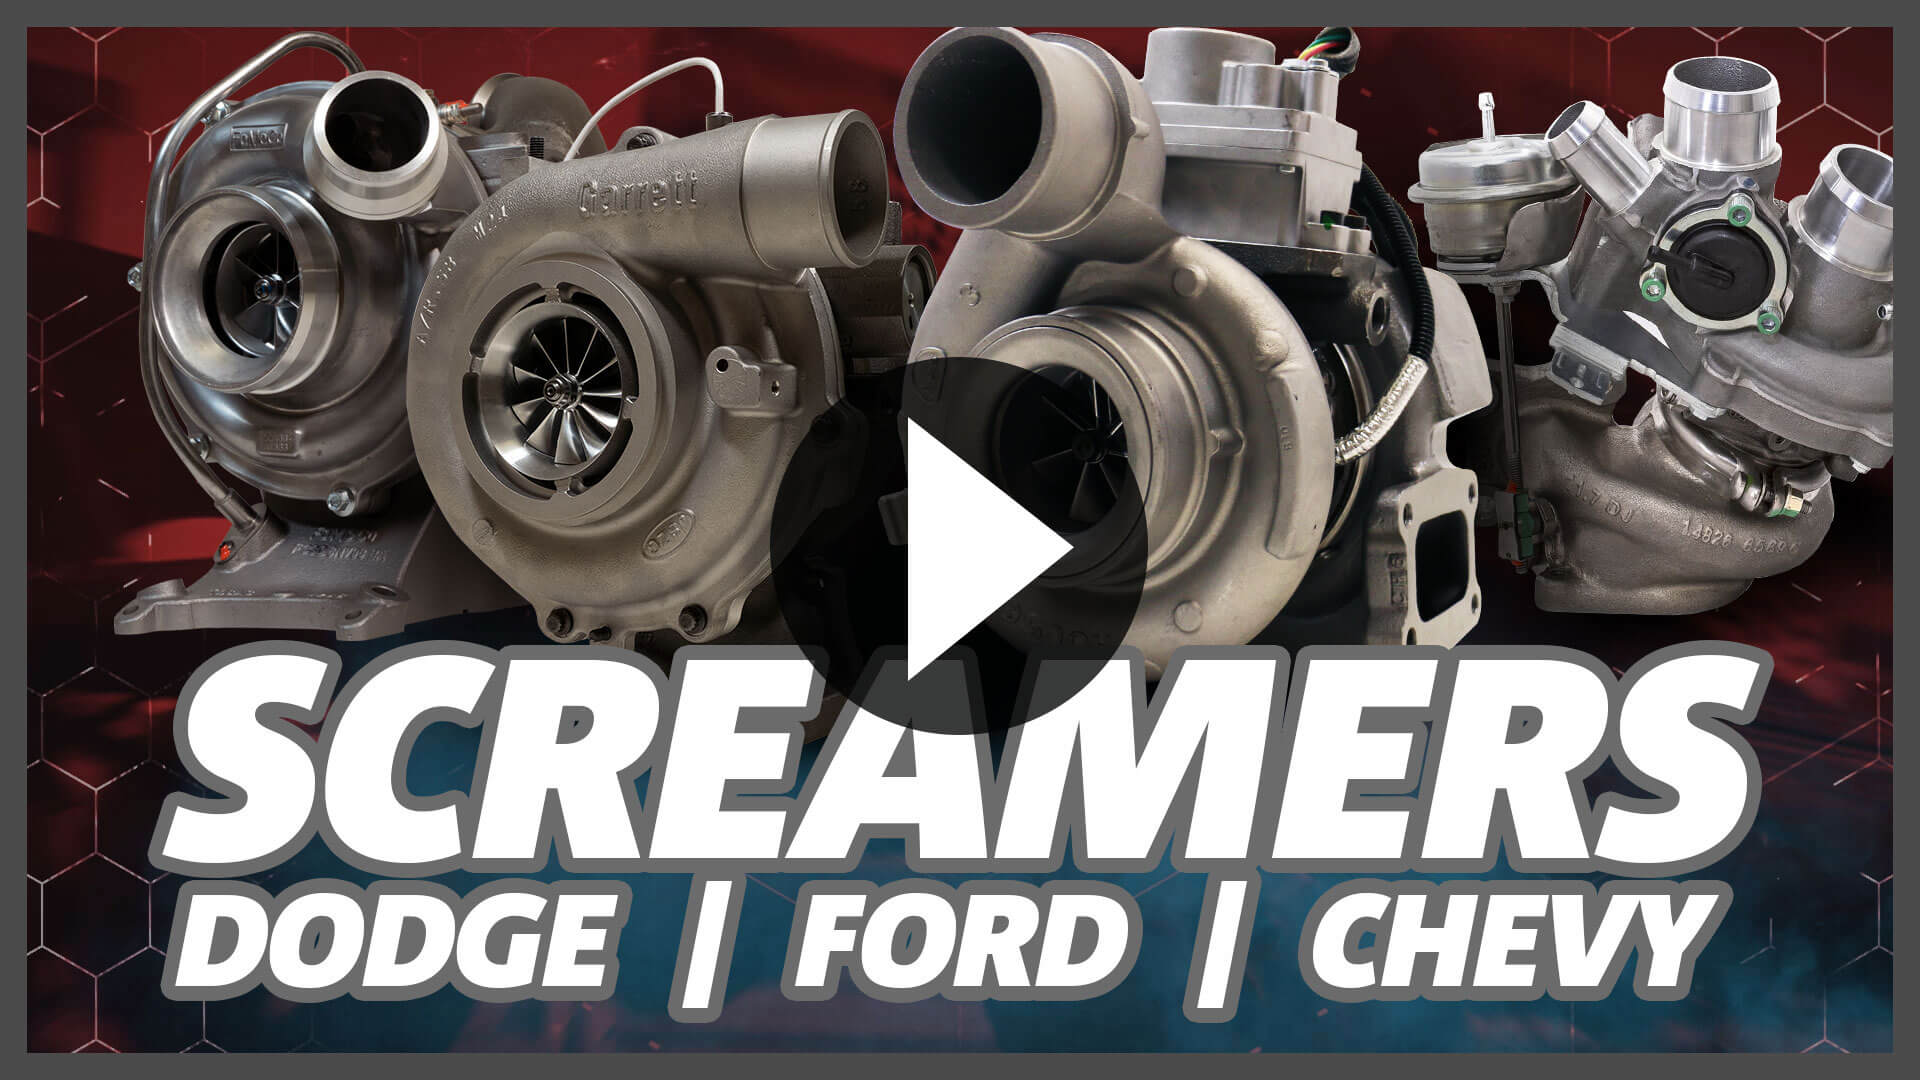 BD Screamers - Dodge / Ford / Chevy